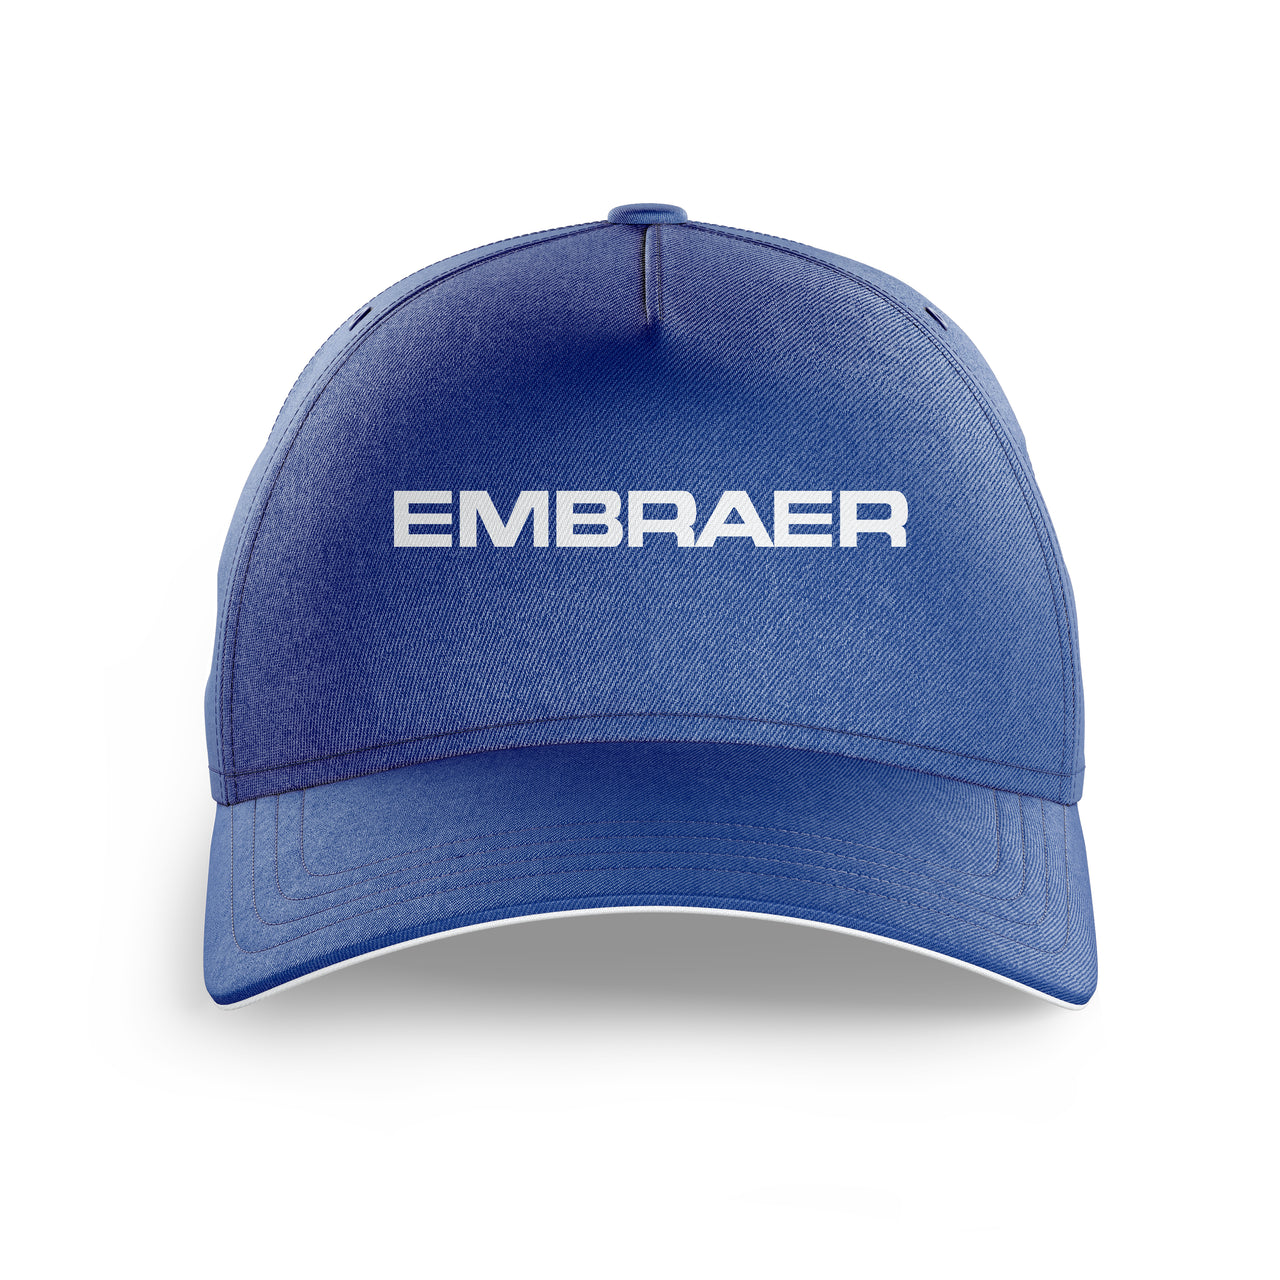 Embraer & Text Printed Hats